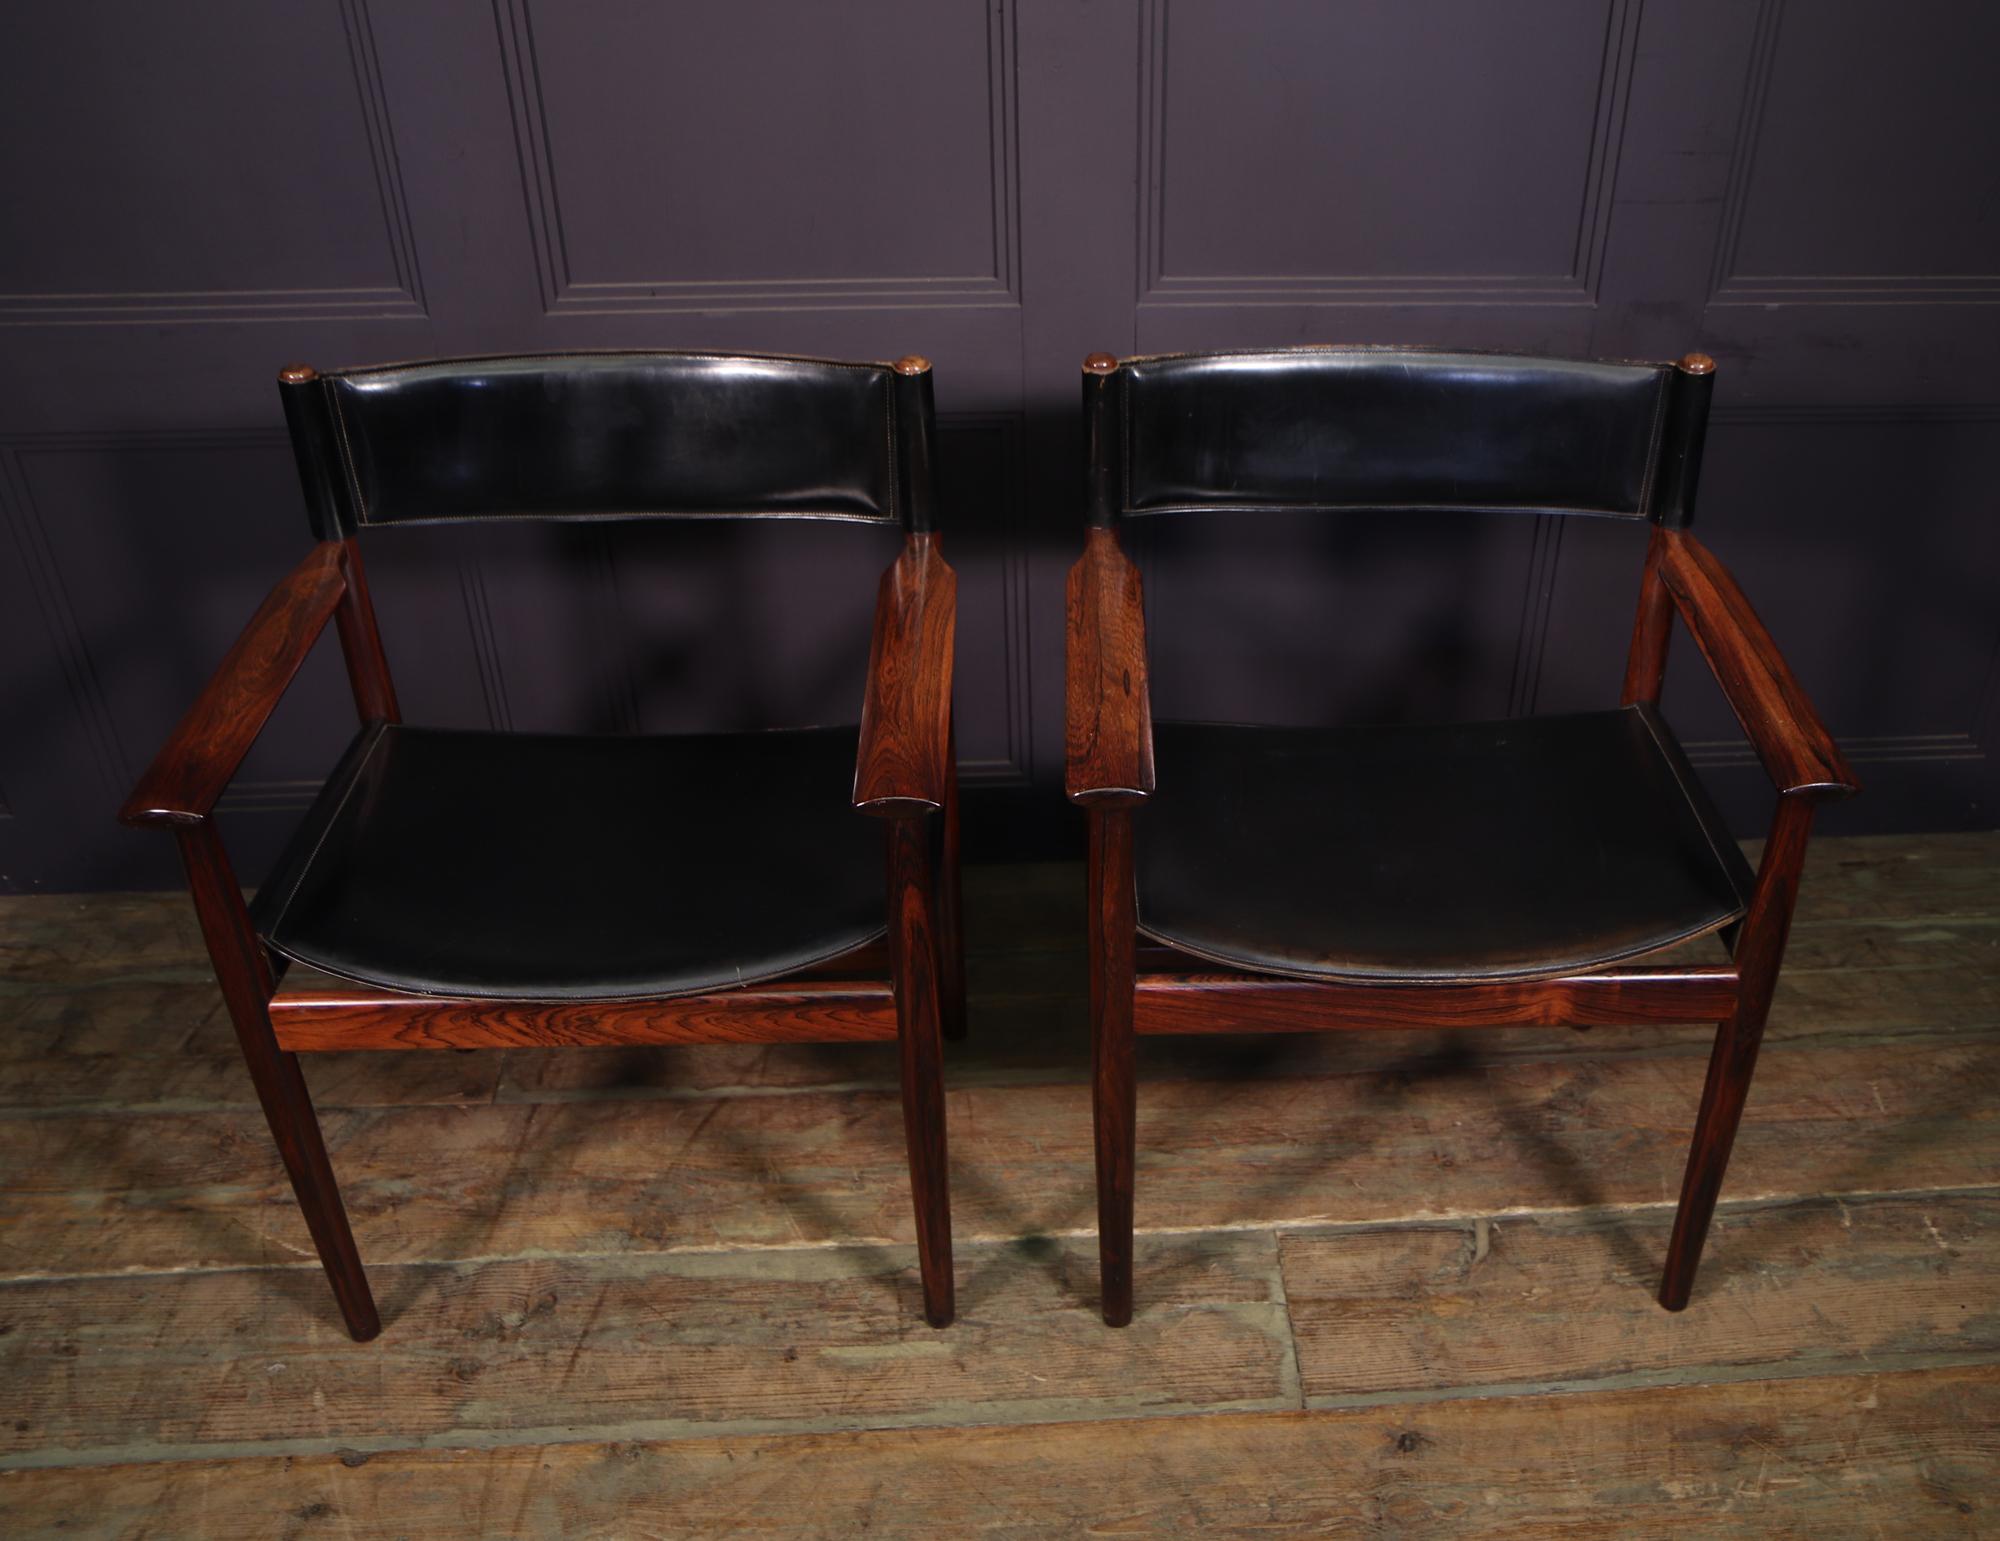 Set of four dining chairs, 2 carvers and 2 side chairs designed by Arne Vodder, manufactured by Sibast in Denmark circa 1950s. These chairs are made of thick black saddle hyde on a beautiful quality tropical hardwood base. Two labels underneath